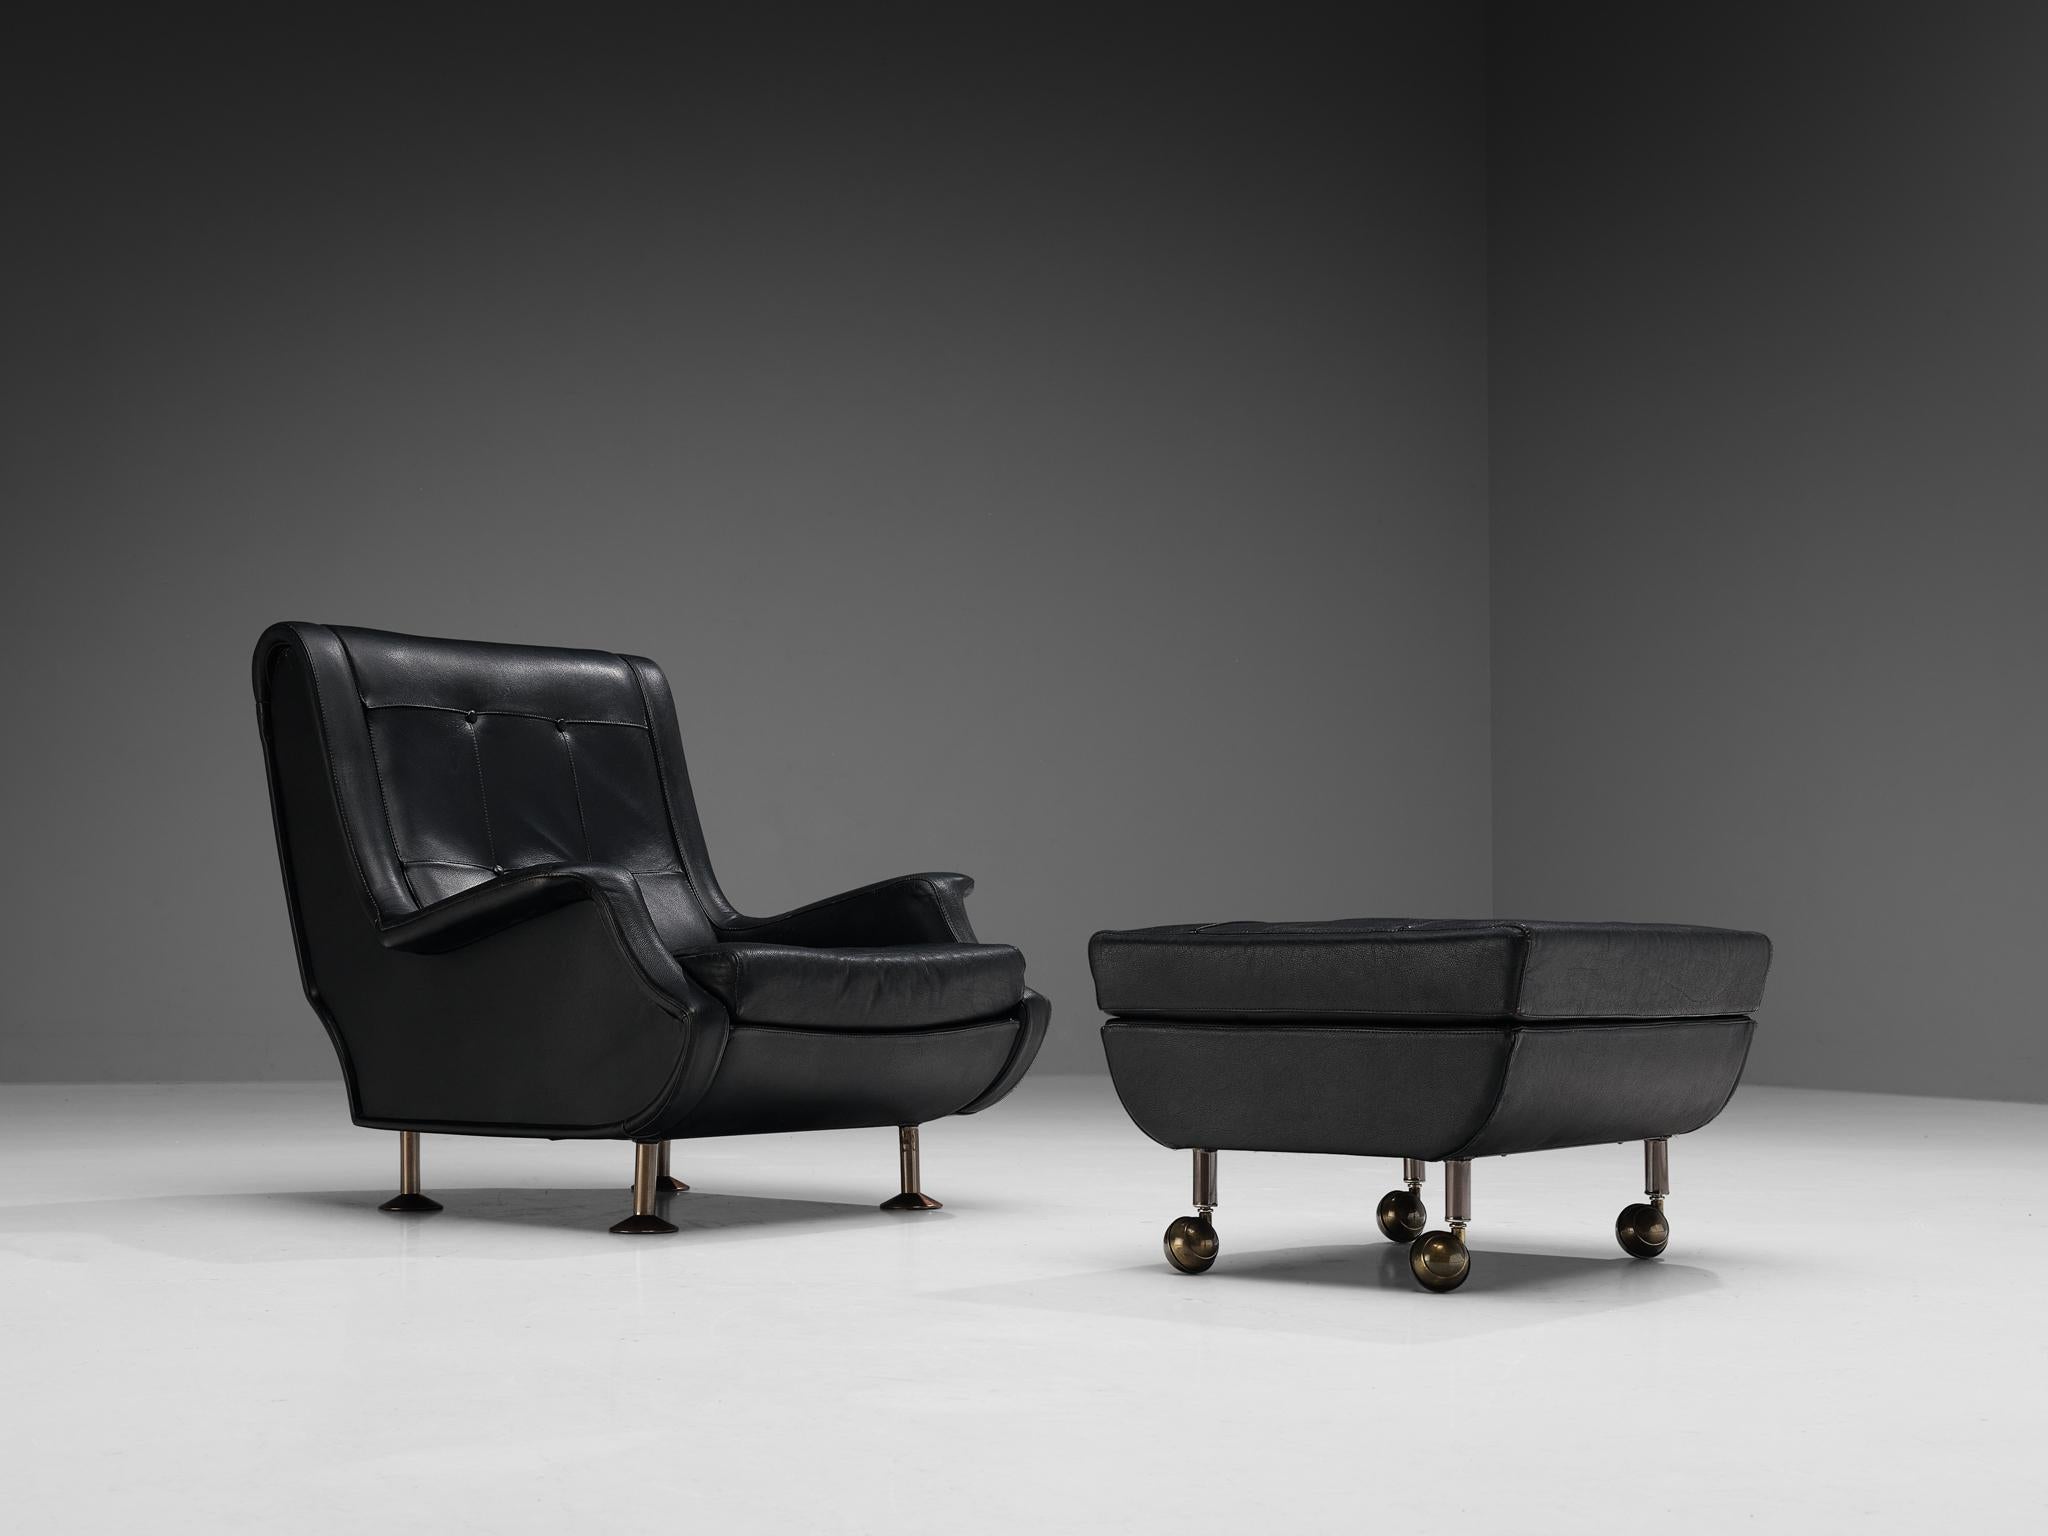 Marco Zanuso for Arflex, lounge chair and ottoman model 'Regent', leather, metal, Italy, designed in 1960

This admirable lounge chair named ‘Regent’ is designed by the talented Italian designer Marco Zanuso in 1960. Characteristic for this model